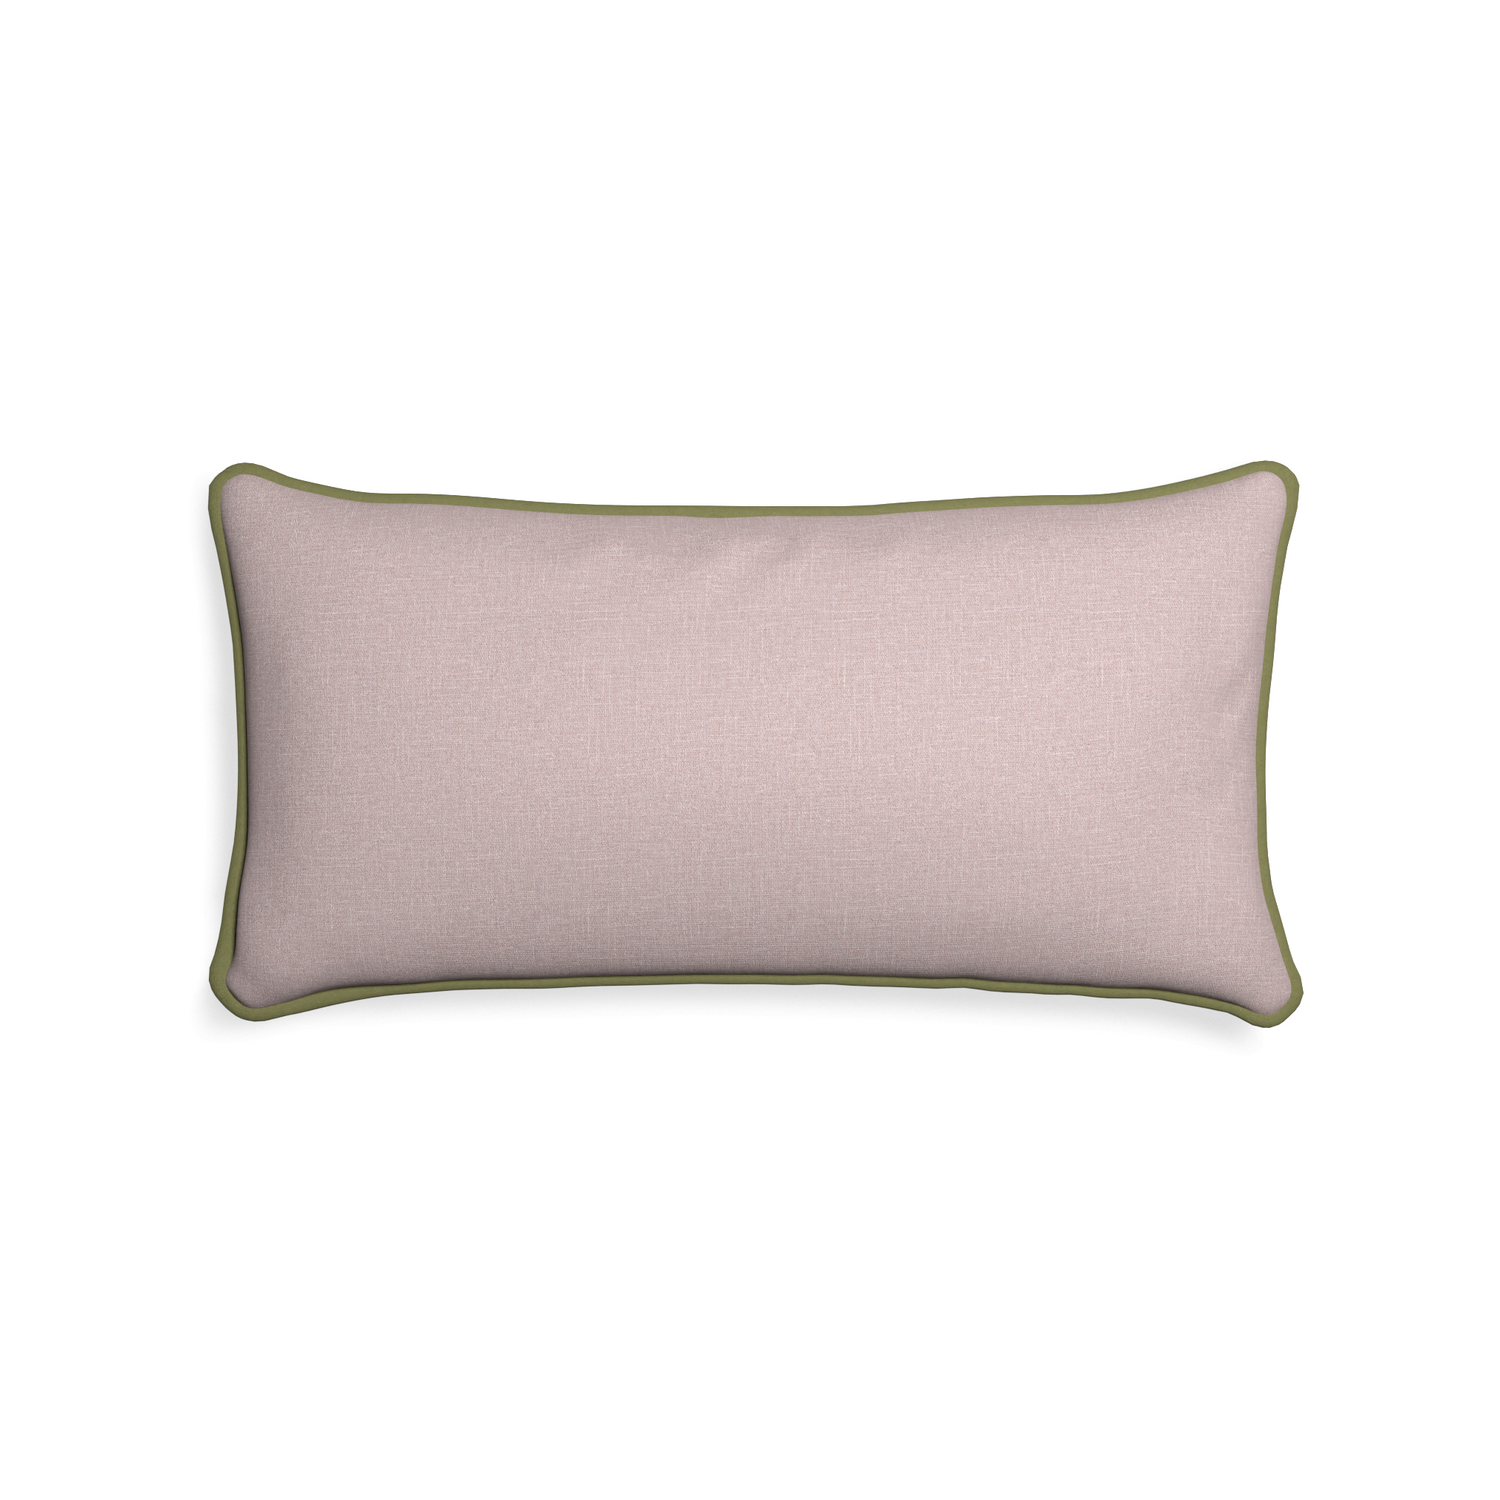 Midi-lumbar orchid custom mauve pinkpillow with moss piping on white background